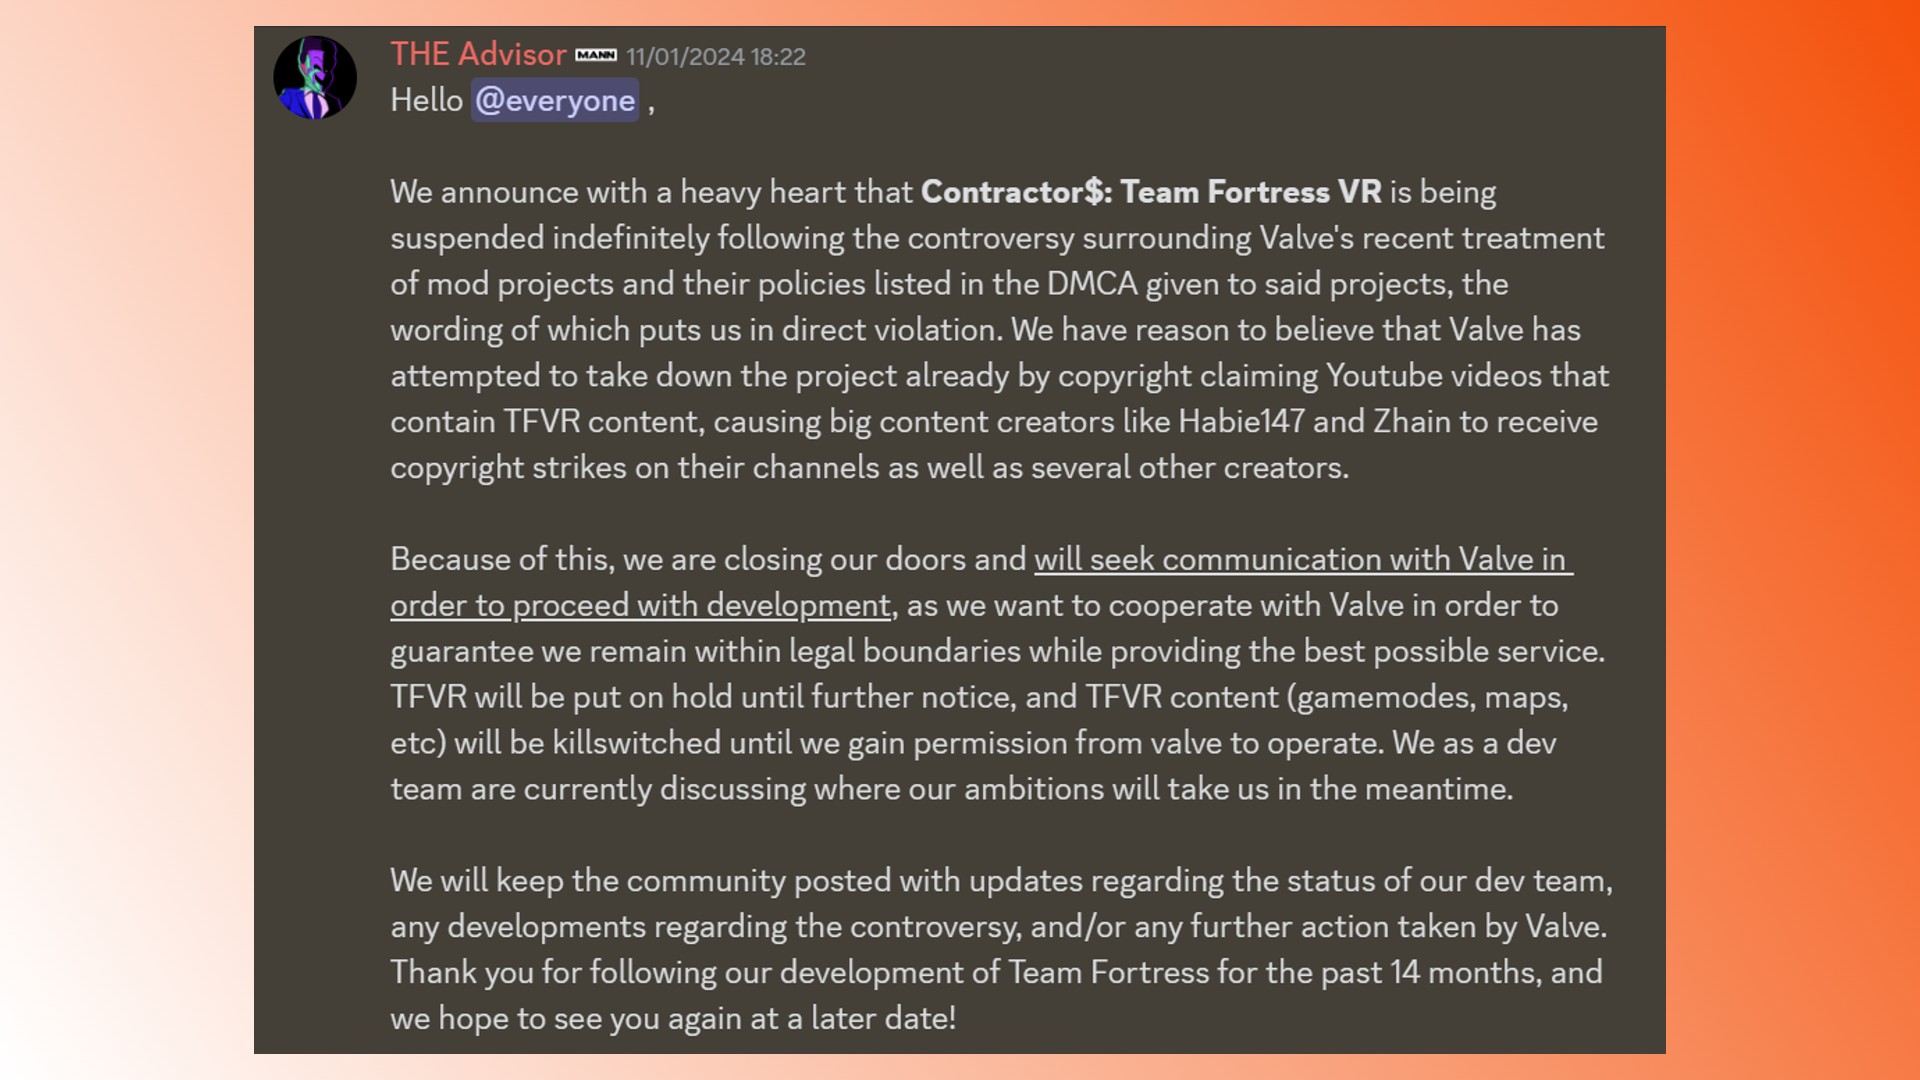 Team Fortress 2 mod pulled offline: A message from the creators of Team Fortress 2 VR regarding Valve